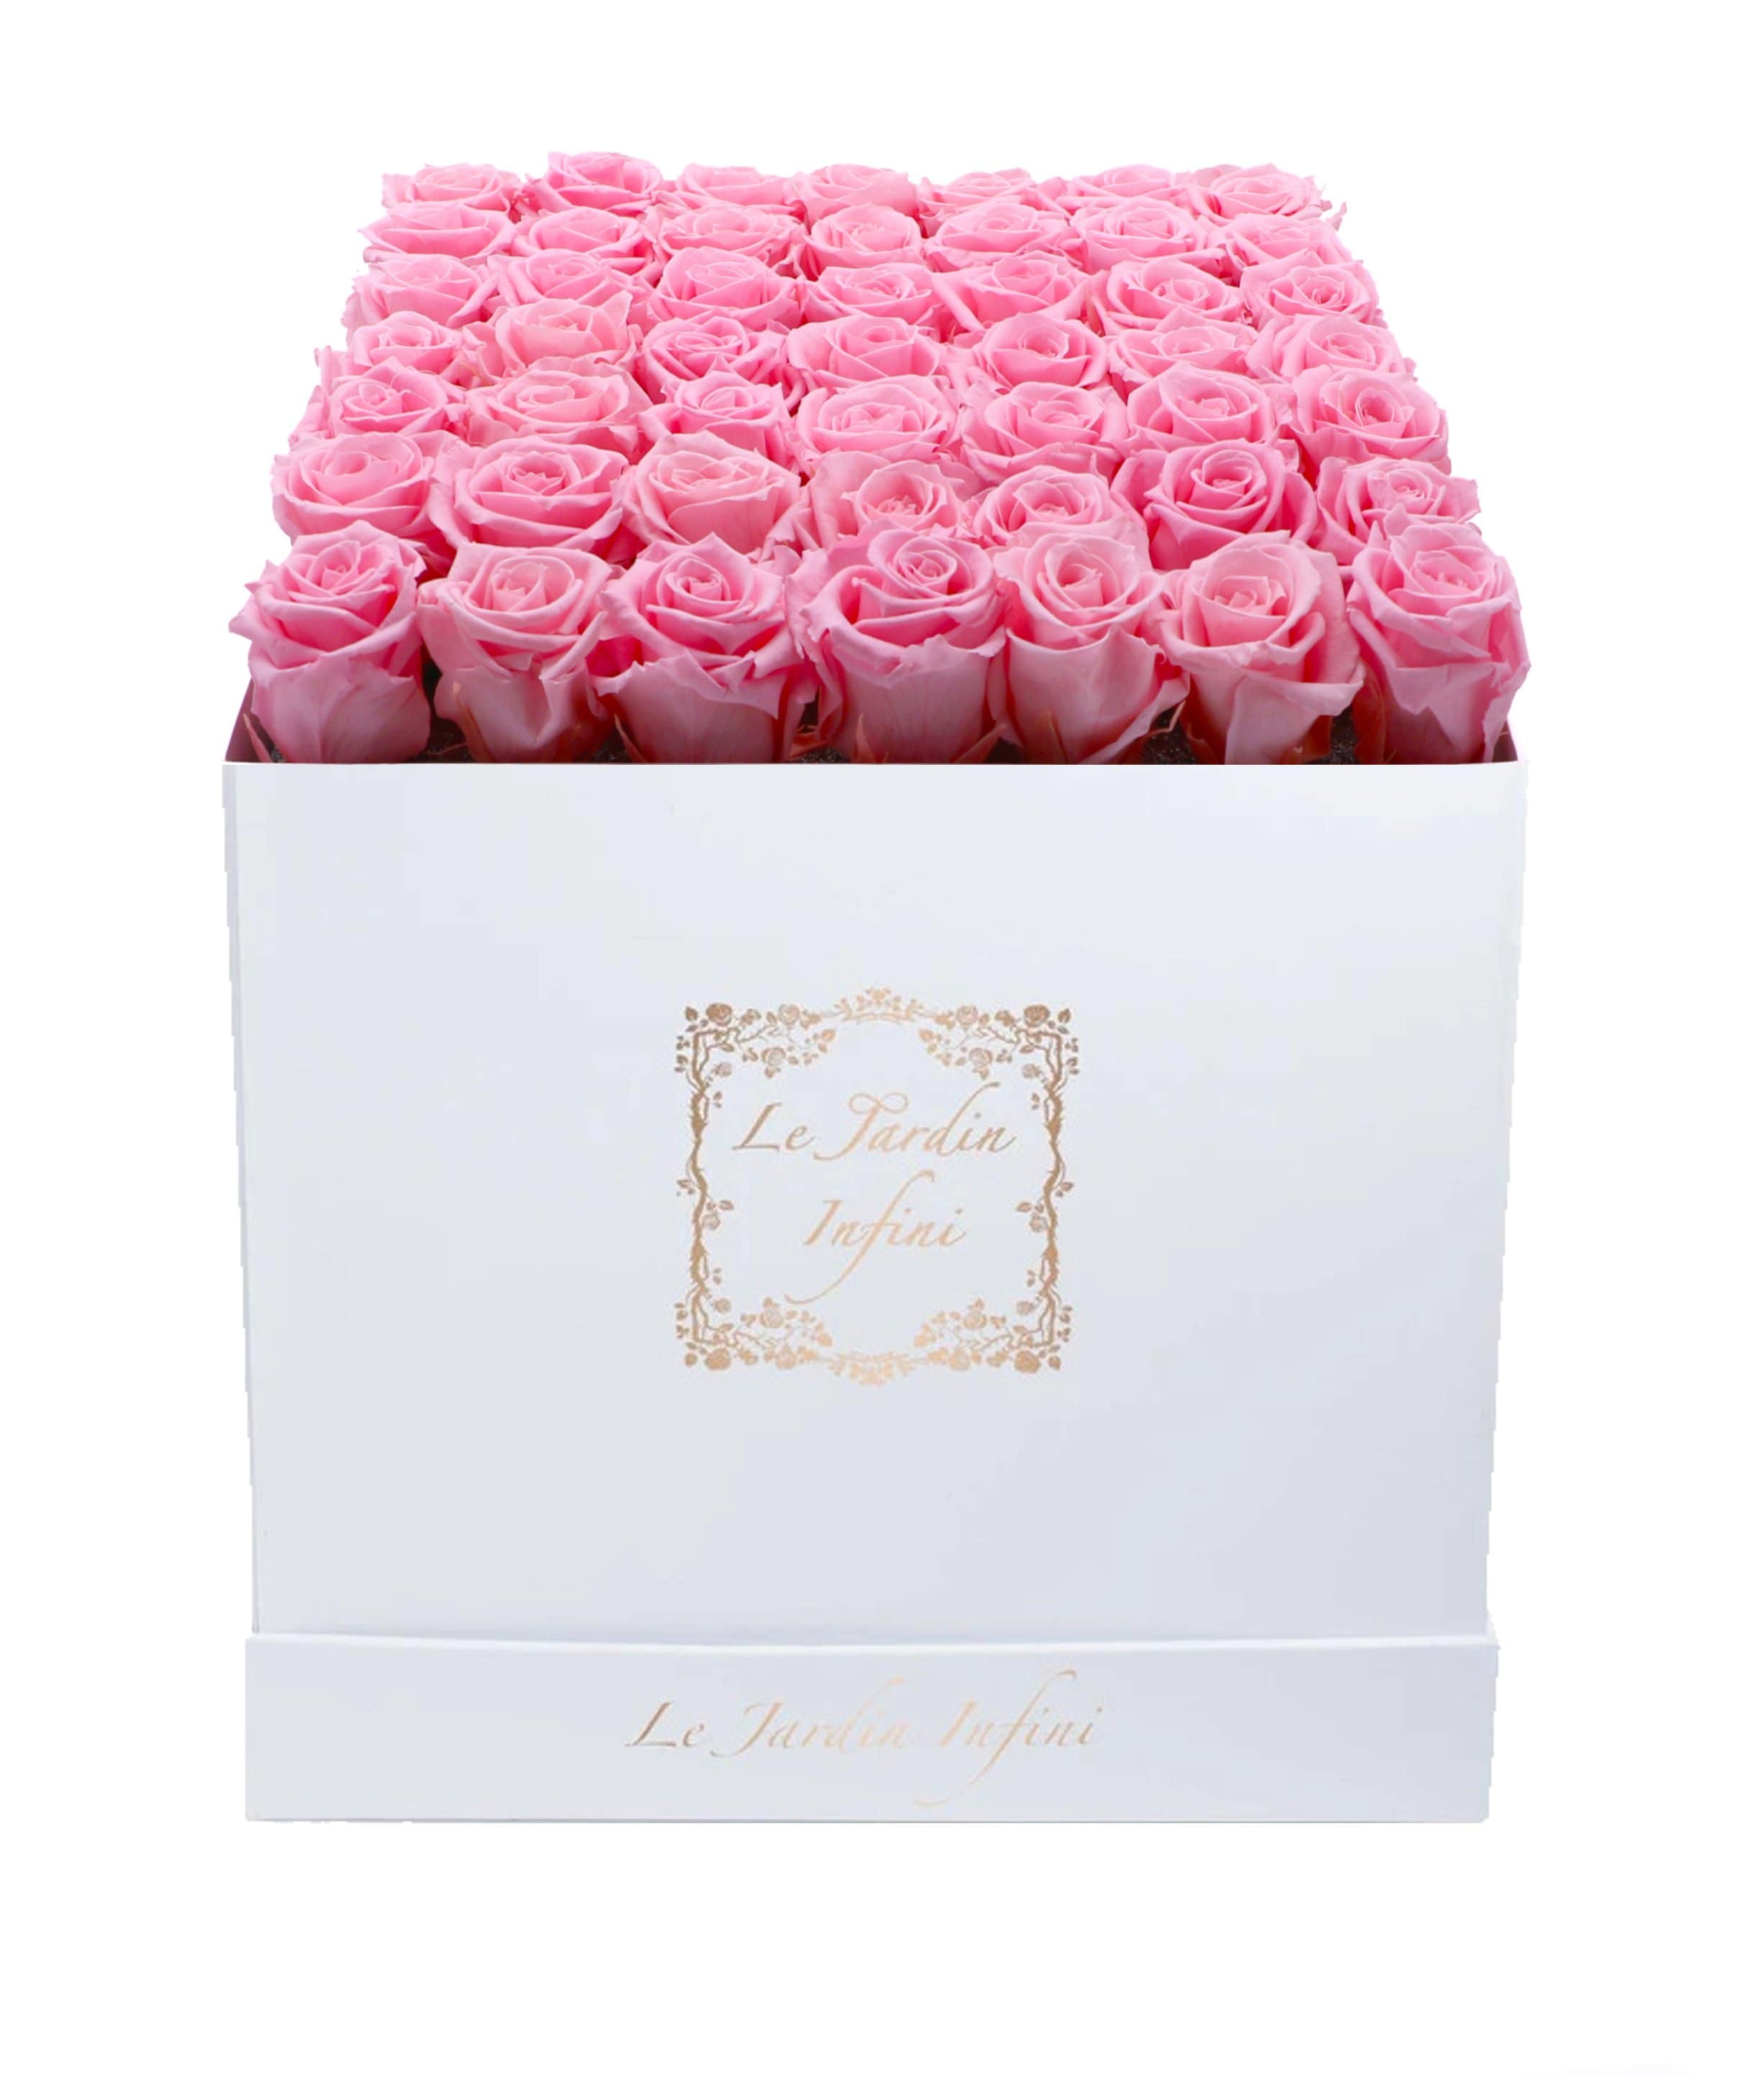 Soft Pink Preserved Roses - Large Square White Box - Le Jardin Infini Roses in a Box